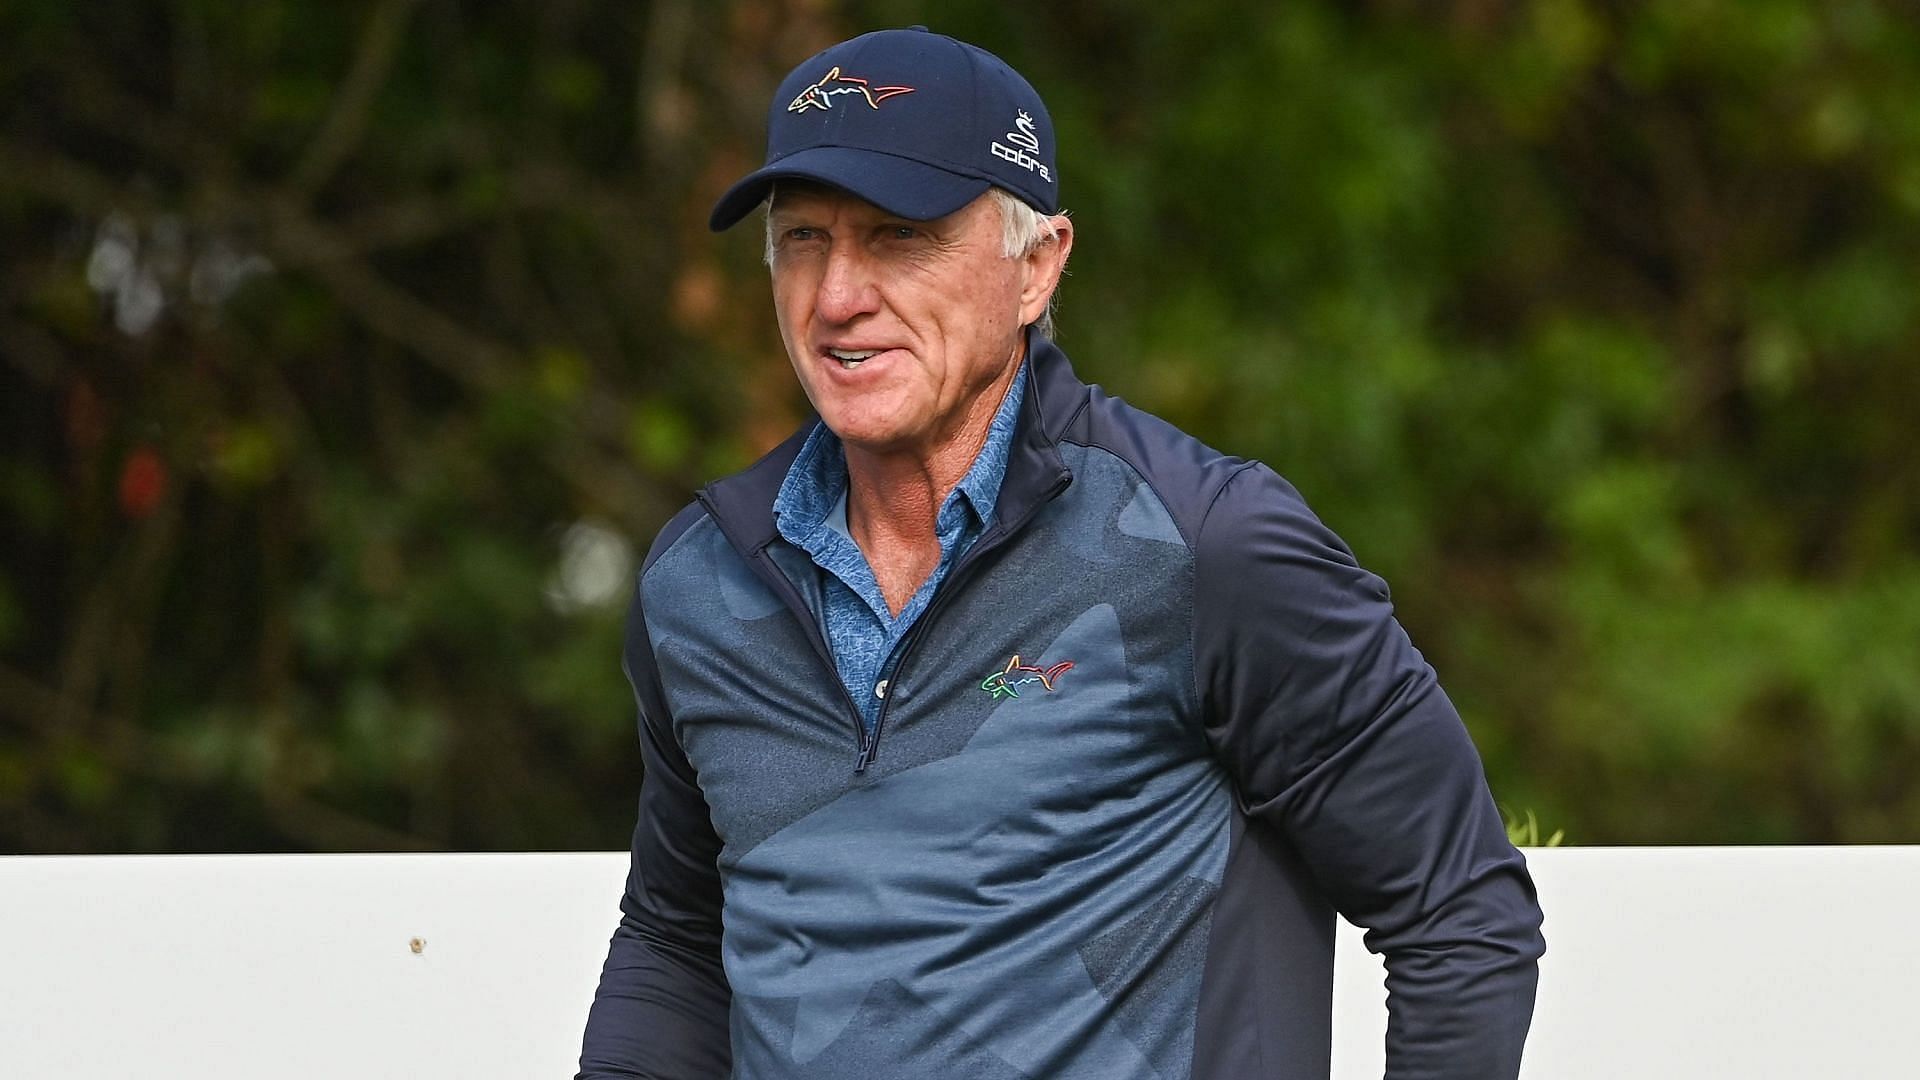 Greg Norman is the CEO of LIV Golf